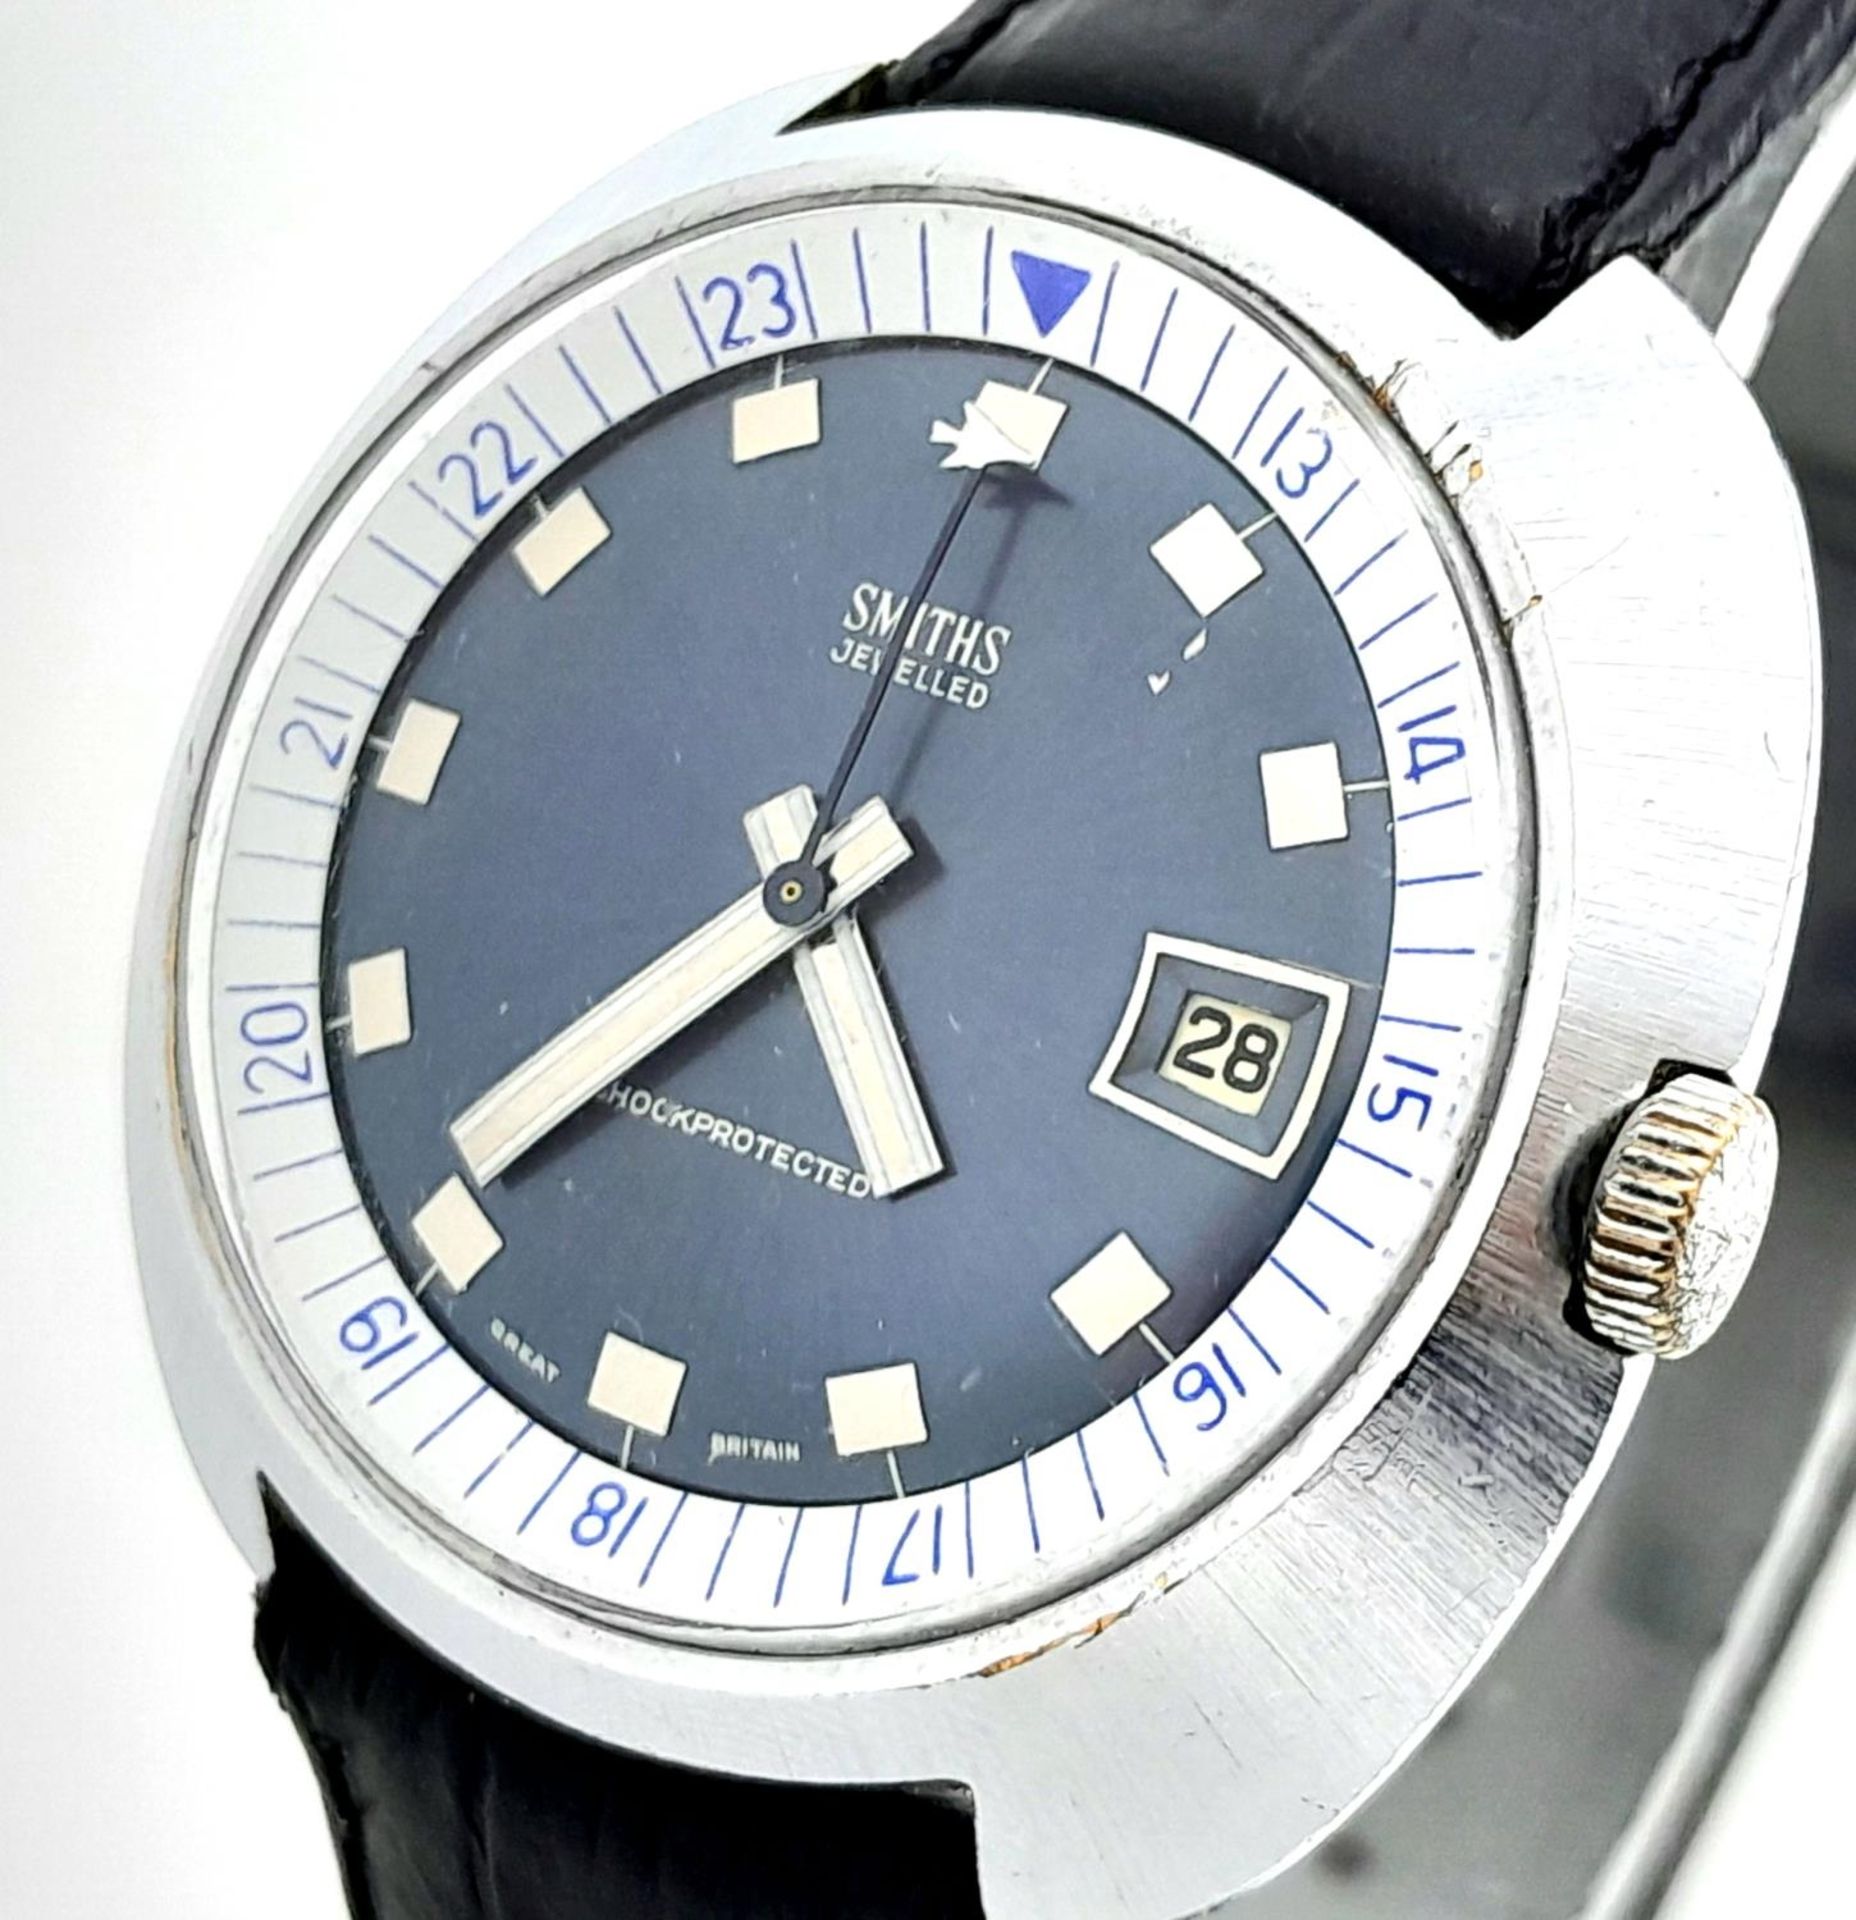 A Vintage Smiths Mechanical Gents Watch. Black leather strap. Stainless steel case - 42mm. Blue dial - Bild 2 aus 6